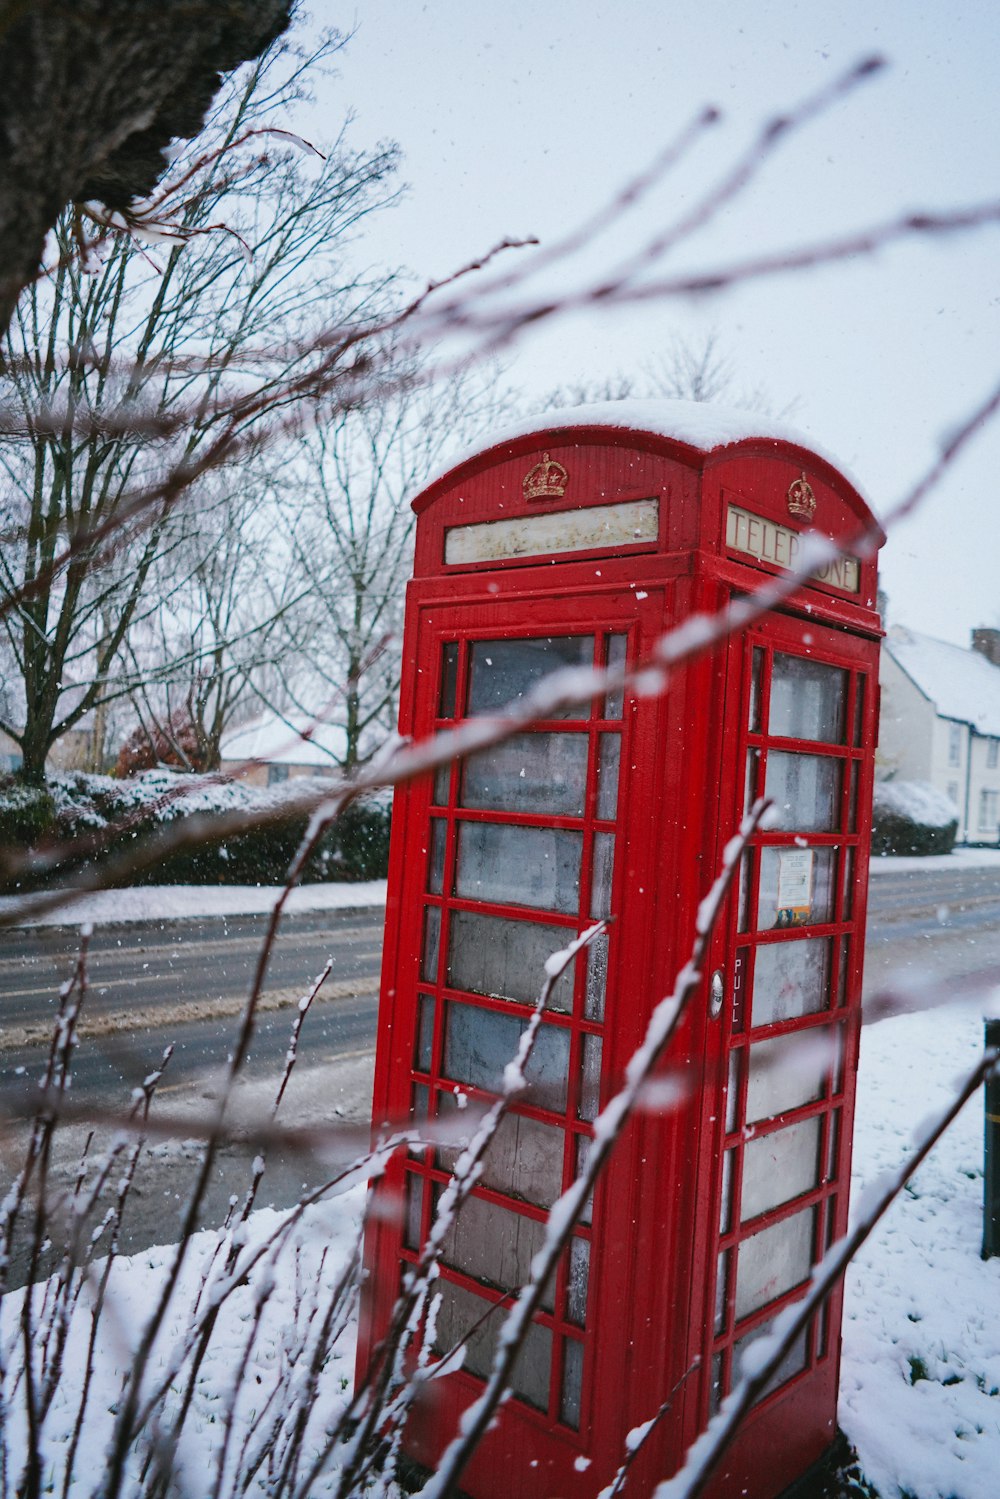 red telephone booth on snow covered ground